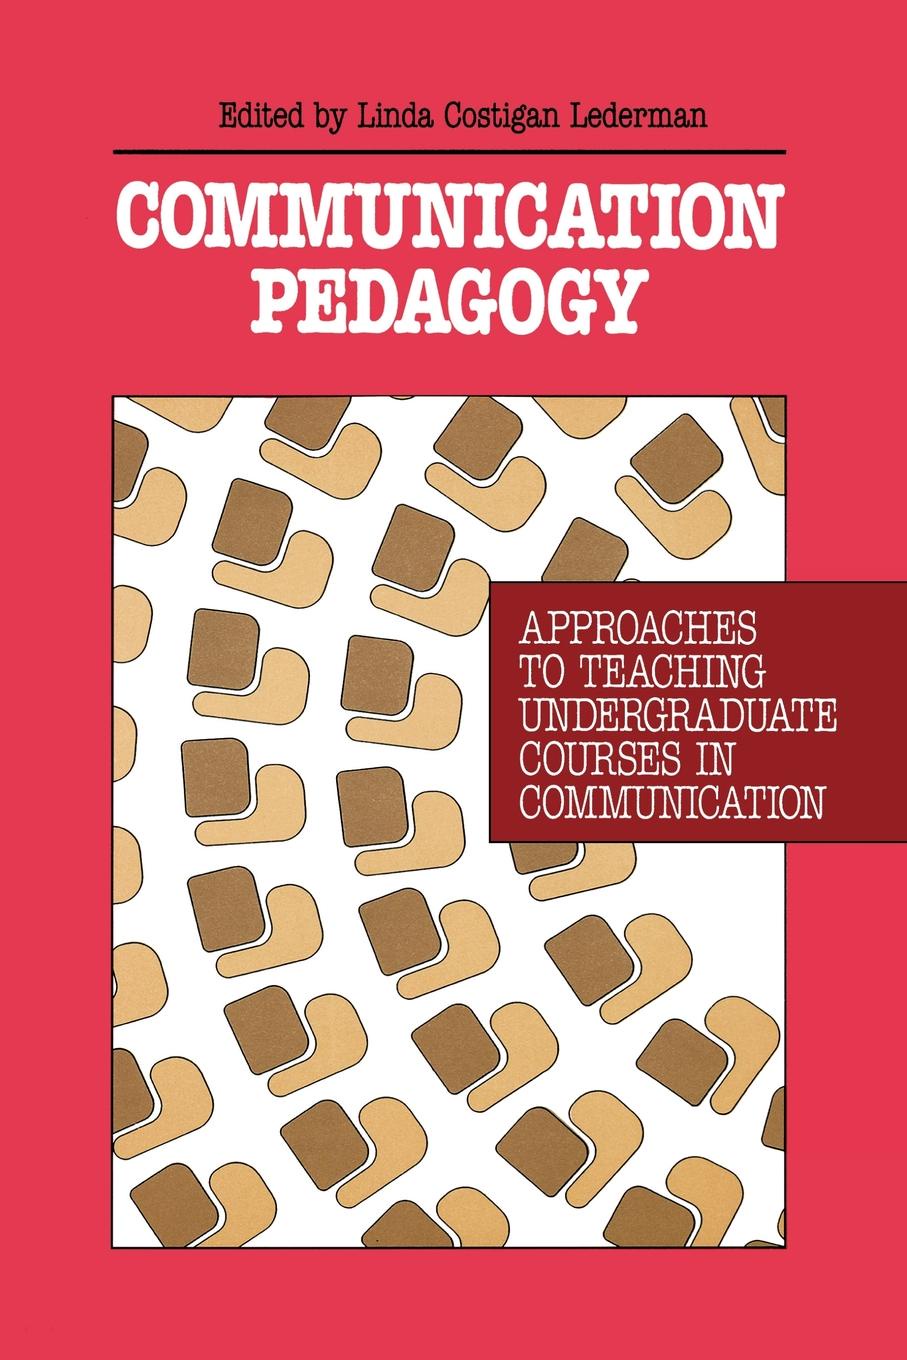 Communication Pedagogy. Approaches to Teaching Undergraduate Courses in Communication